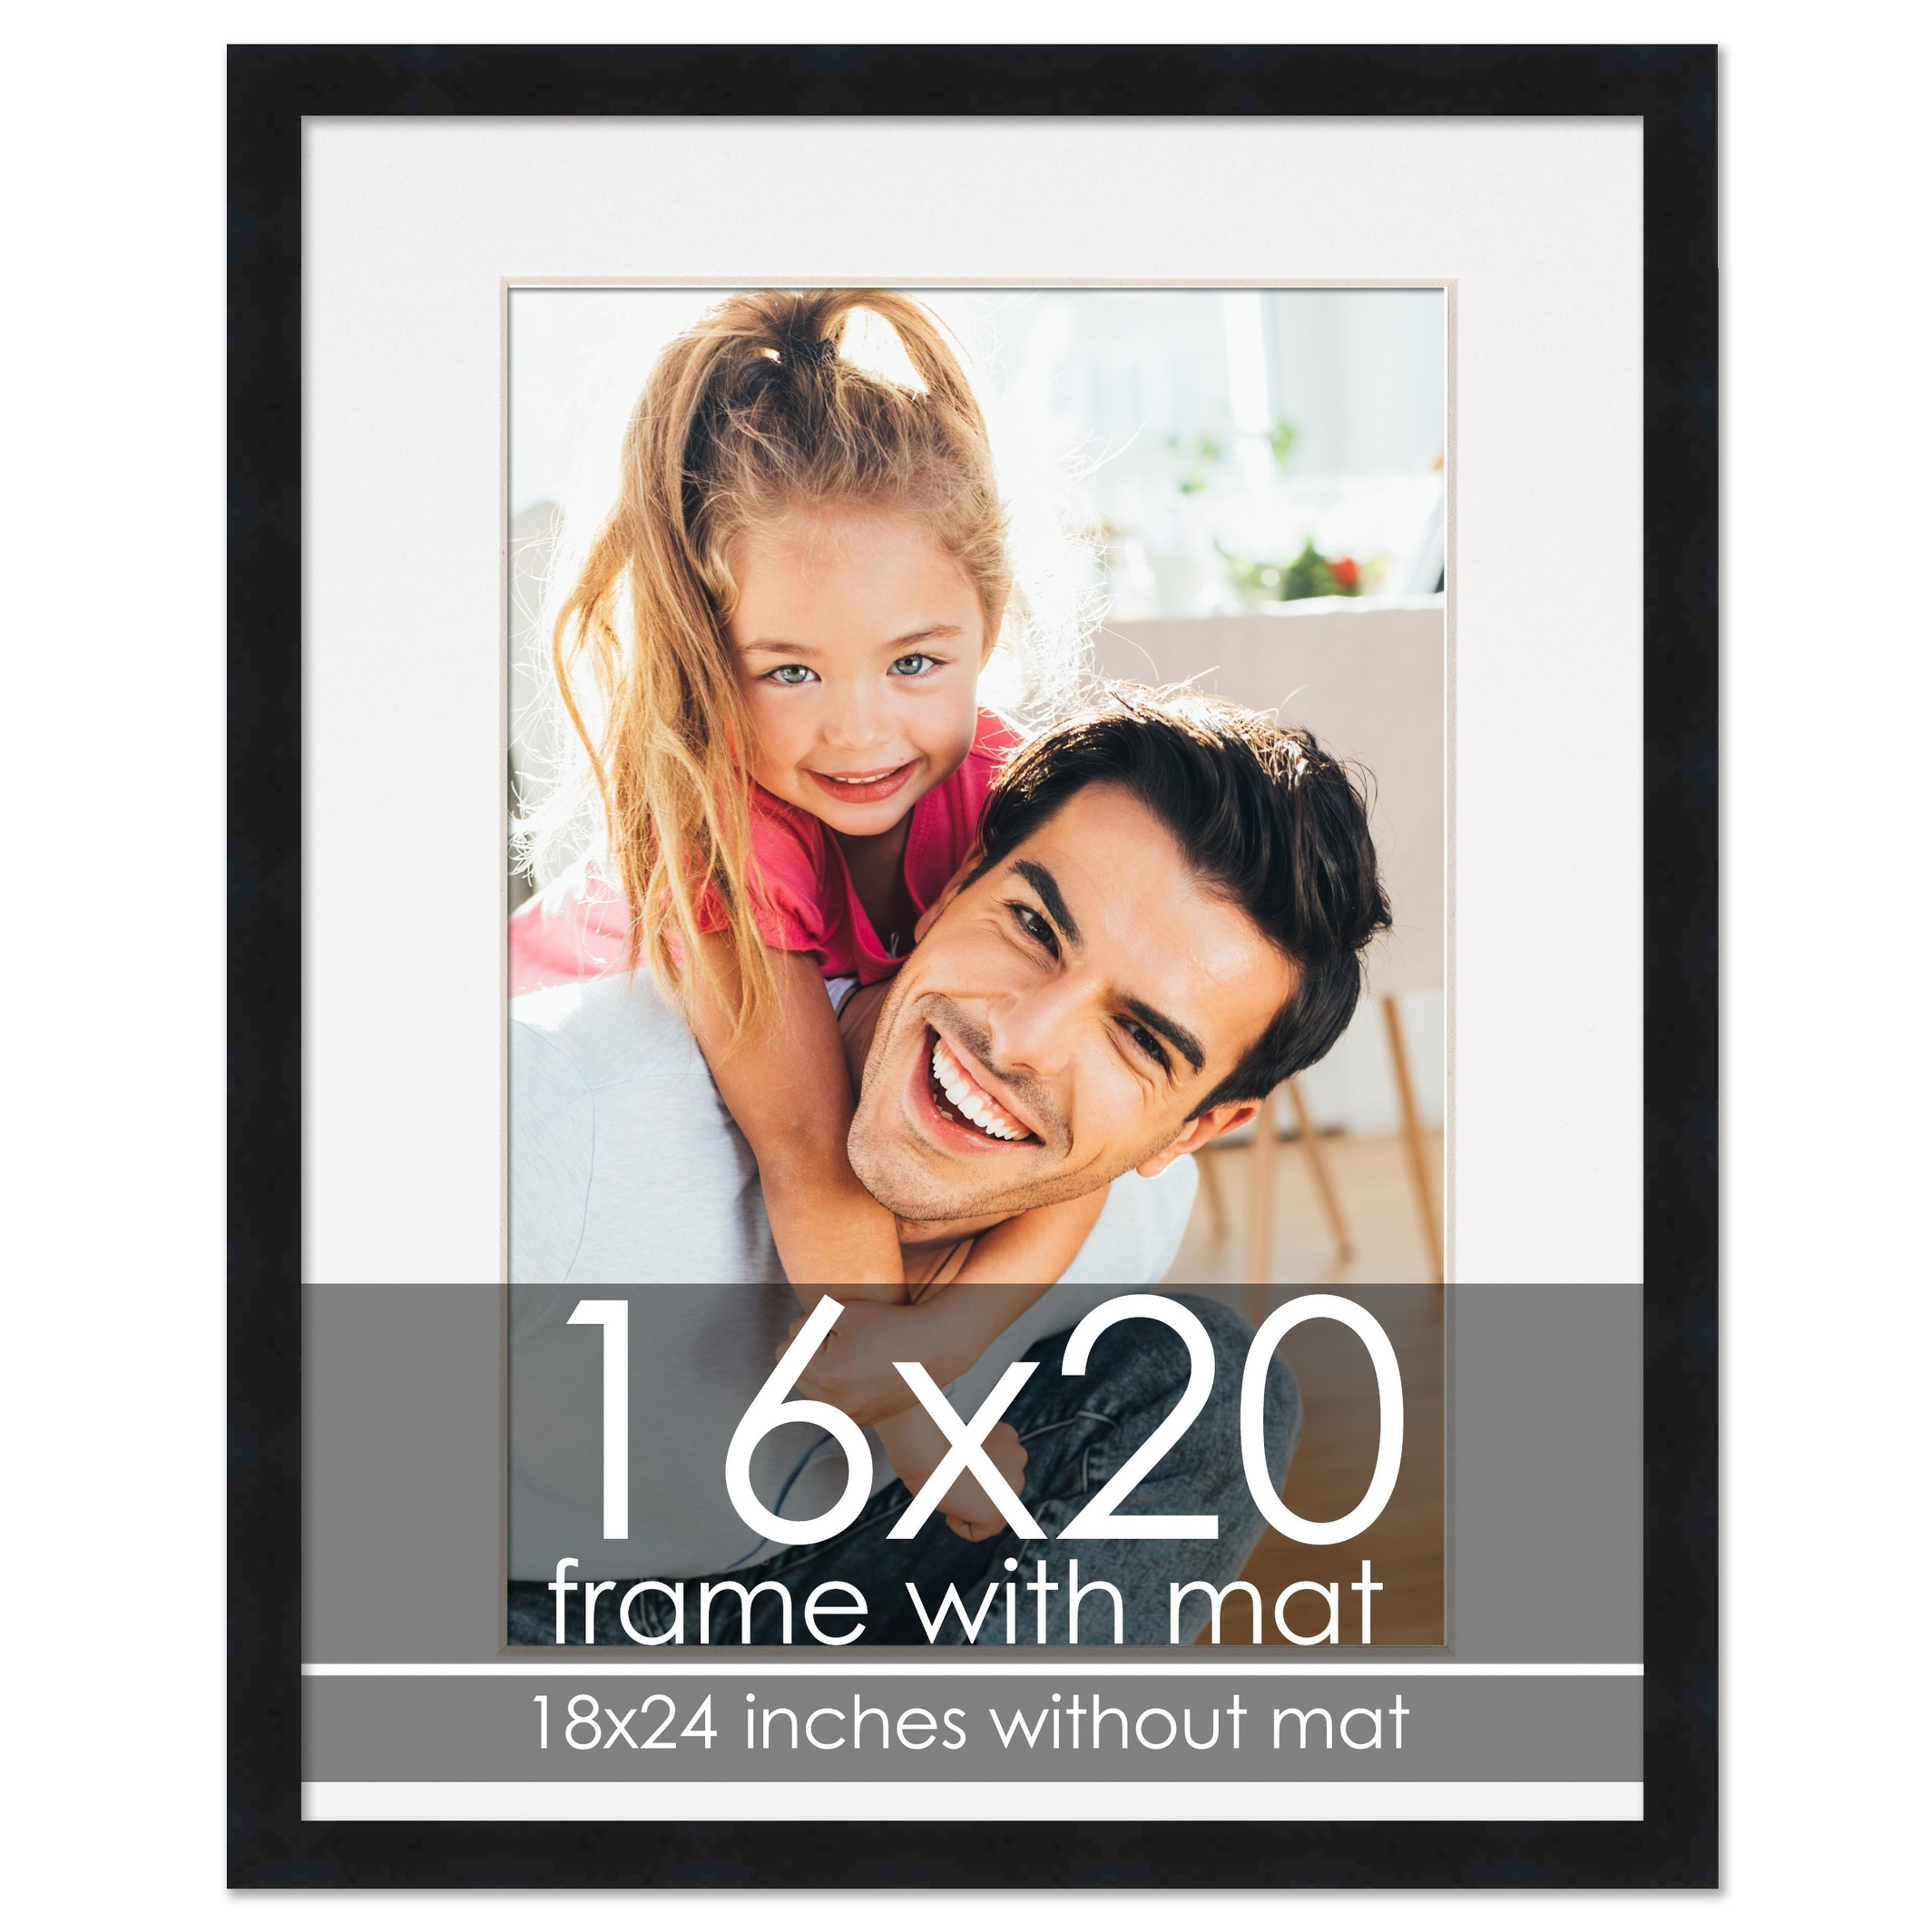 18X24 Aluminum Picture Frame with Ivory Color Mat for 16X20 Photo -  Sawtooth H